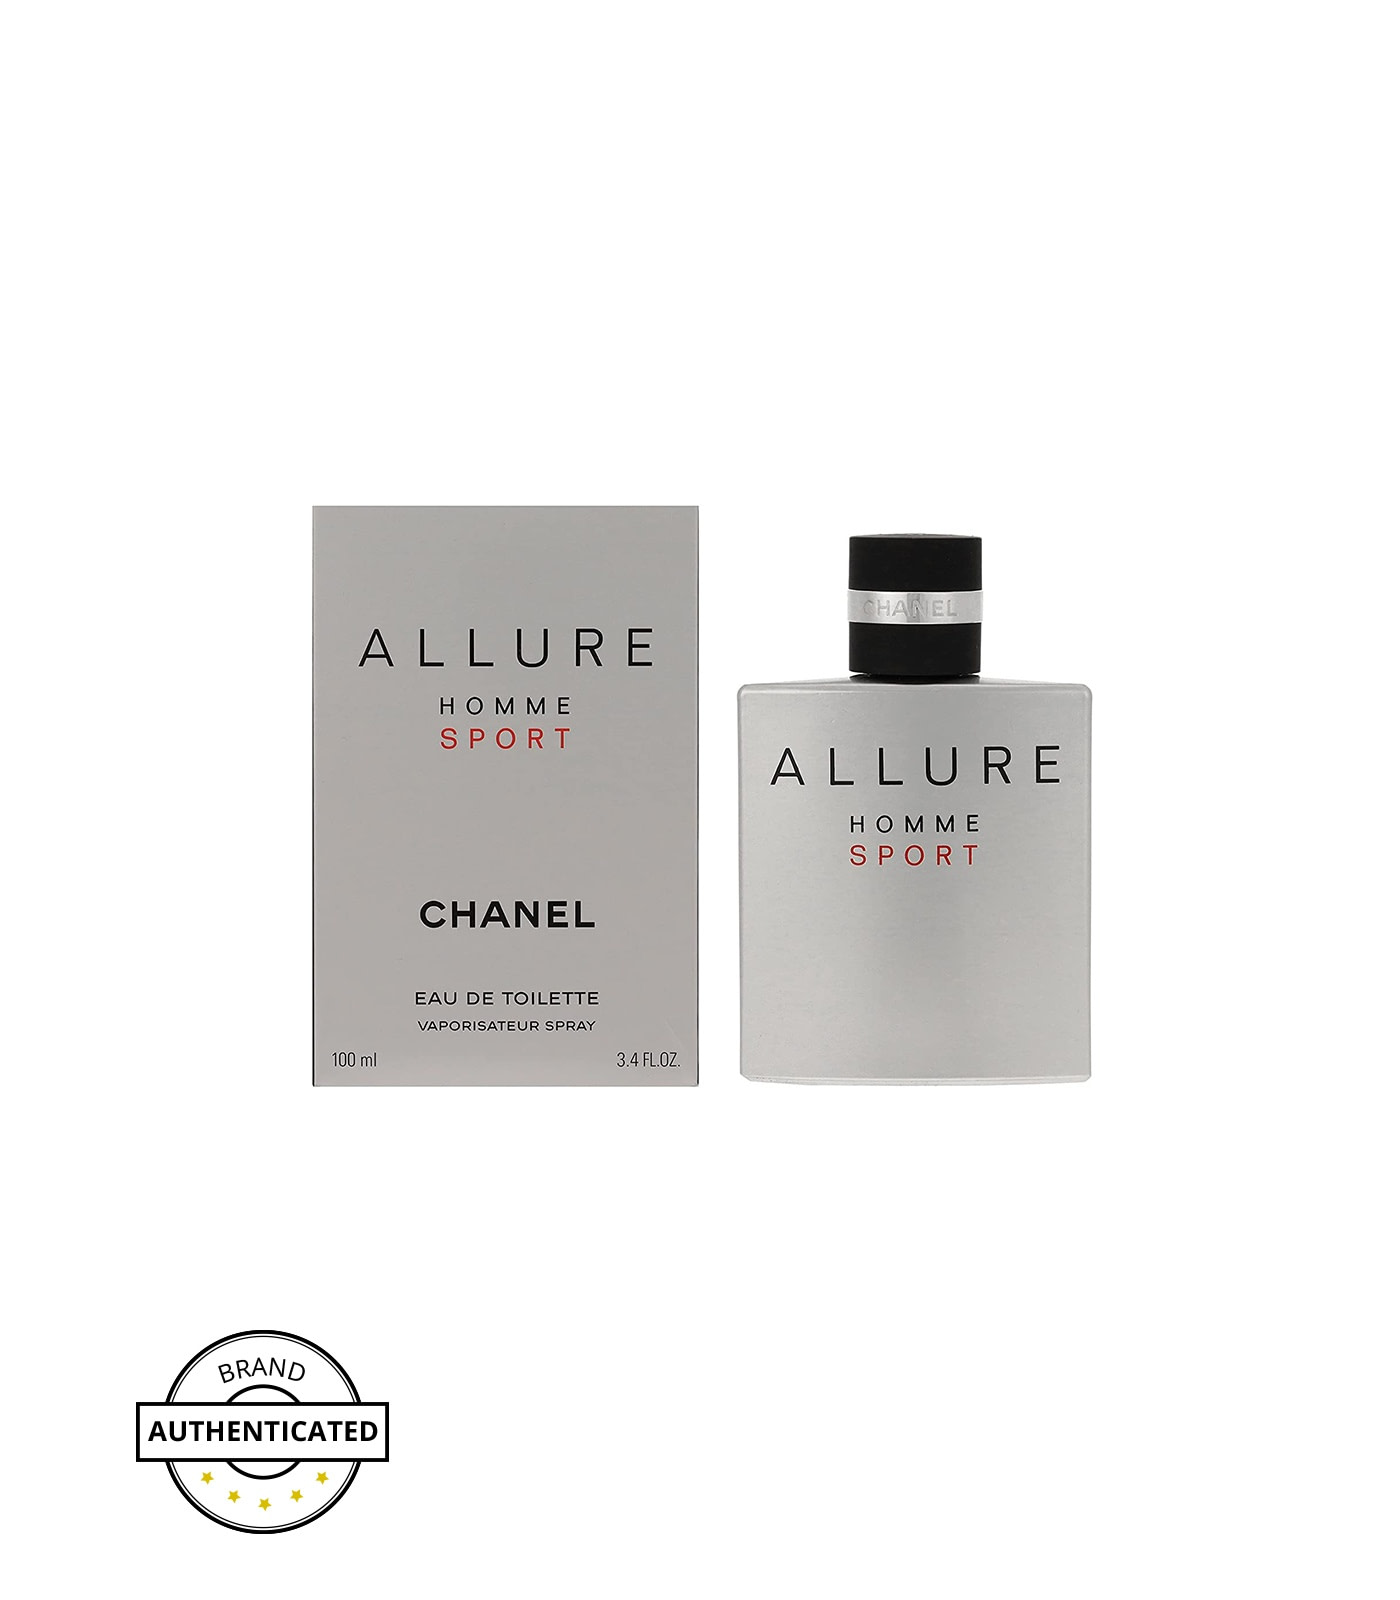 Духи allure homme. Chanel Allure homme Sport. Chanel Allure homme Sport мужские. Шанель духи мужские Allure. Chanel Allure homme Sport 100ml.